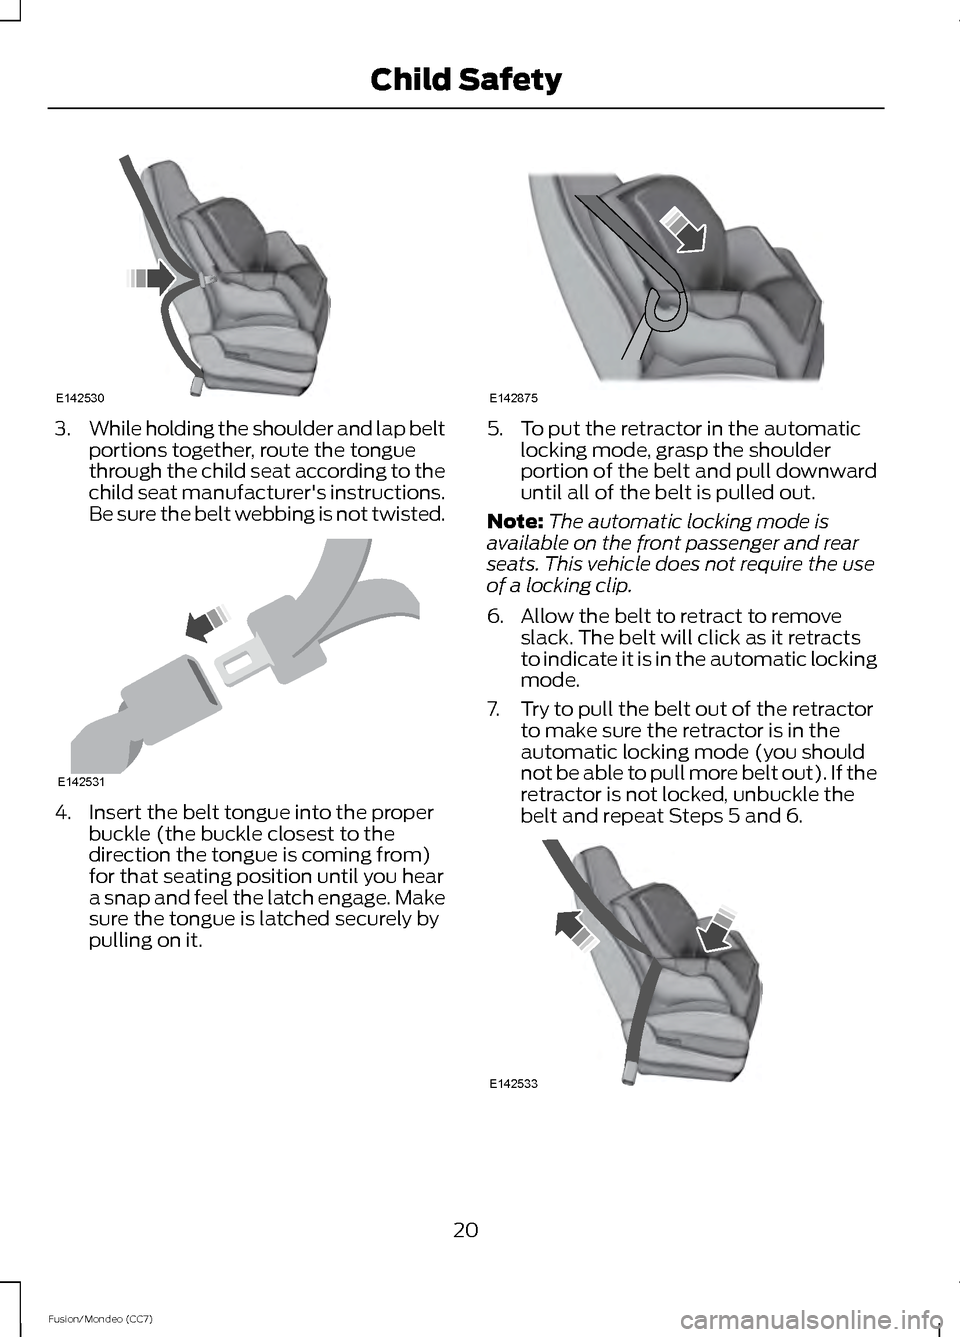 FORD FUSION (AMERICAS) 2013 2.G Owners Manual 3.
While holding the shoulder and lap belt
portions together, route the tongue
through the child seat according to the
child seat manufacturers instructions.
Be sure the belt webbing is not twisted. 